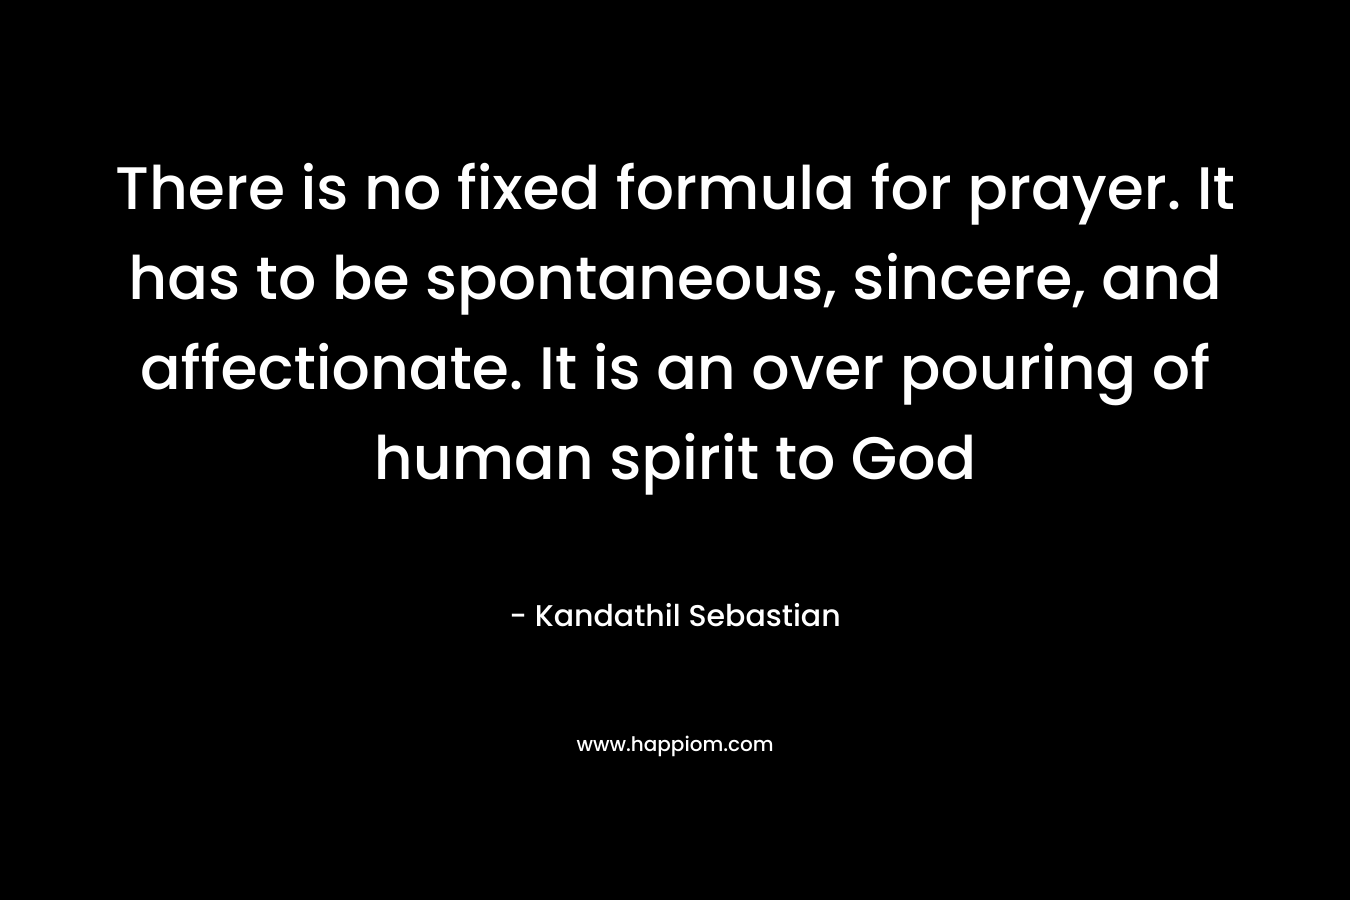 There is no fixed formula for prayer. It has to be spontaneous, sincere, and affectionate. It is an over pouring of human spirit to God – Kandathil Sebastian